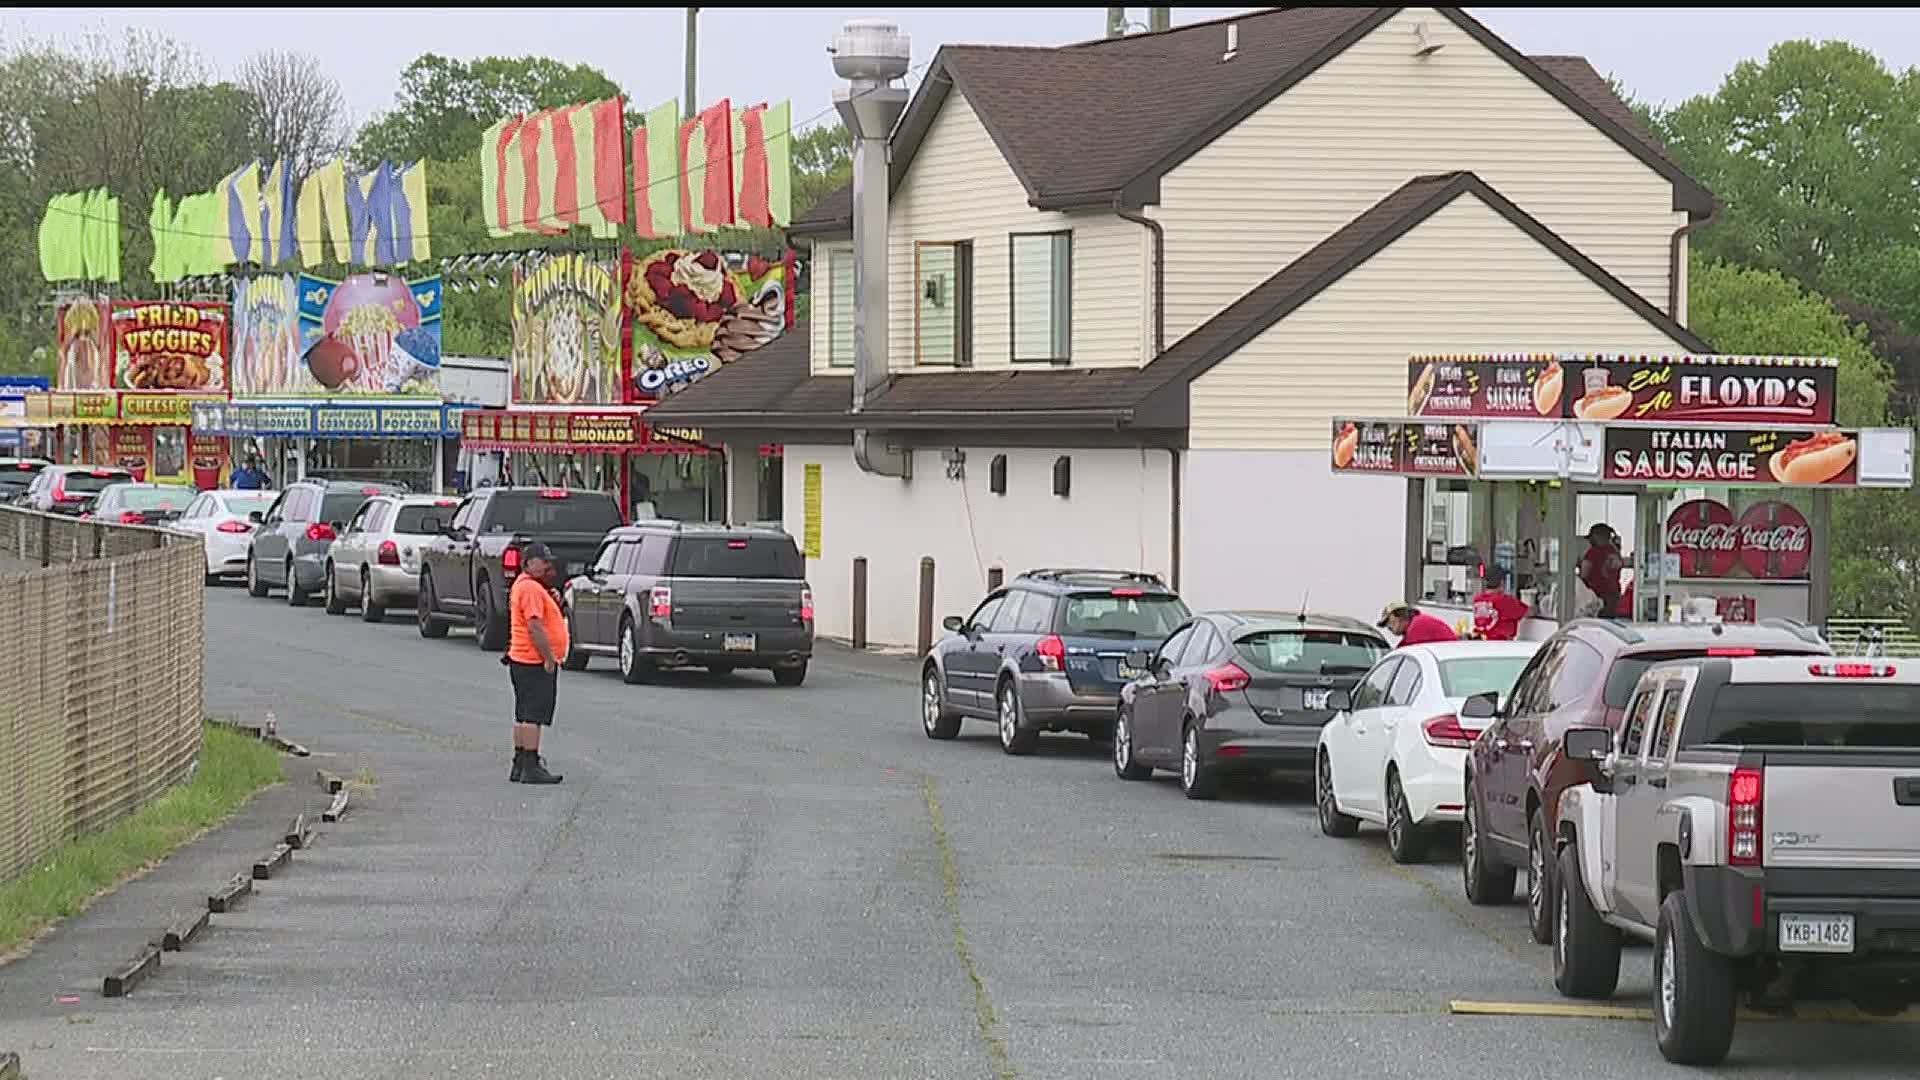 The Lancaster county fire company turns it's annual carnival into a drive through event featuring food trucks.